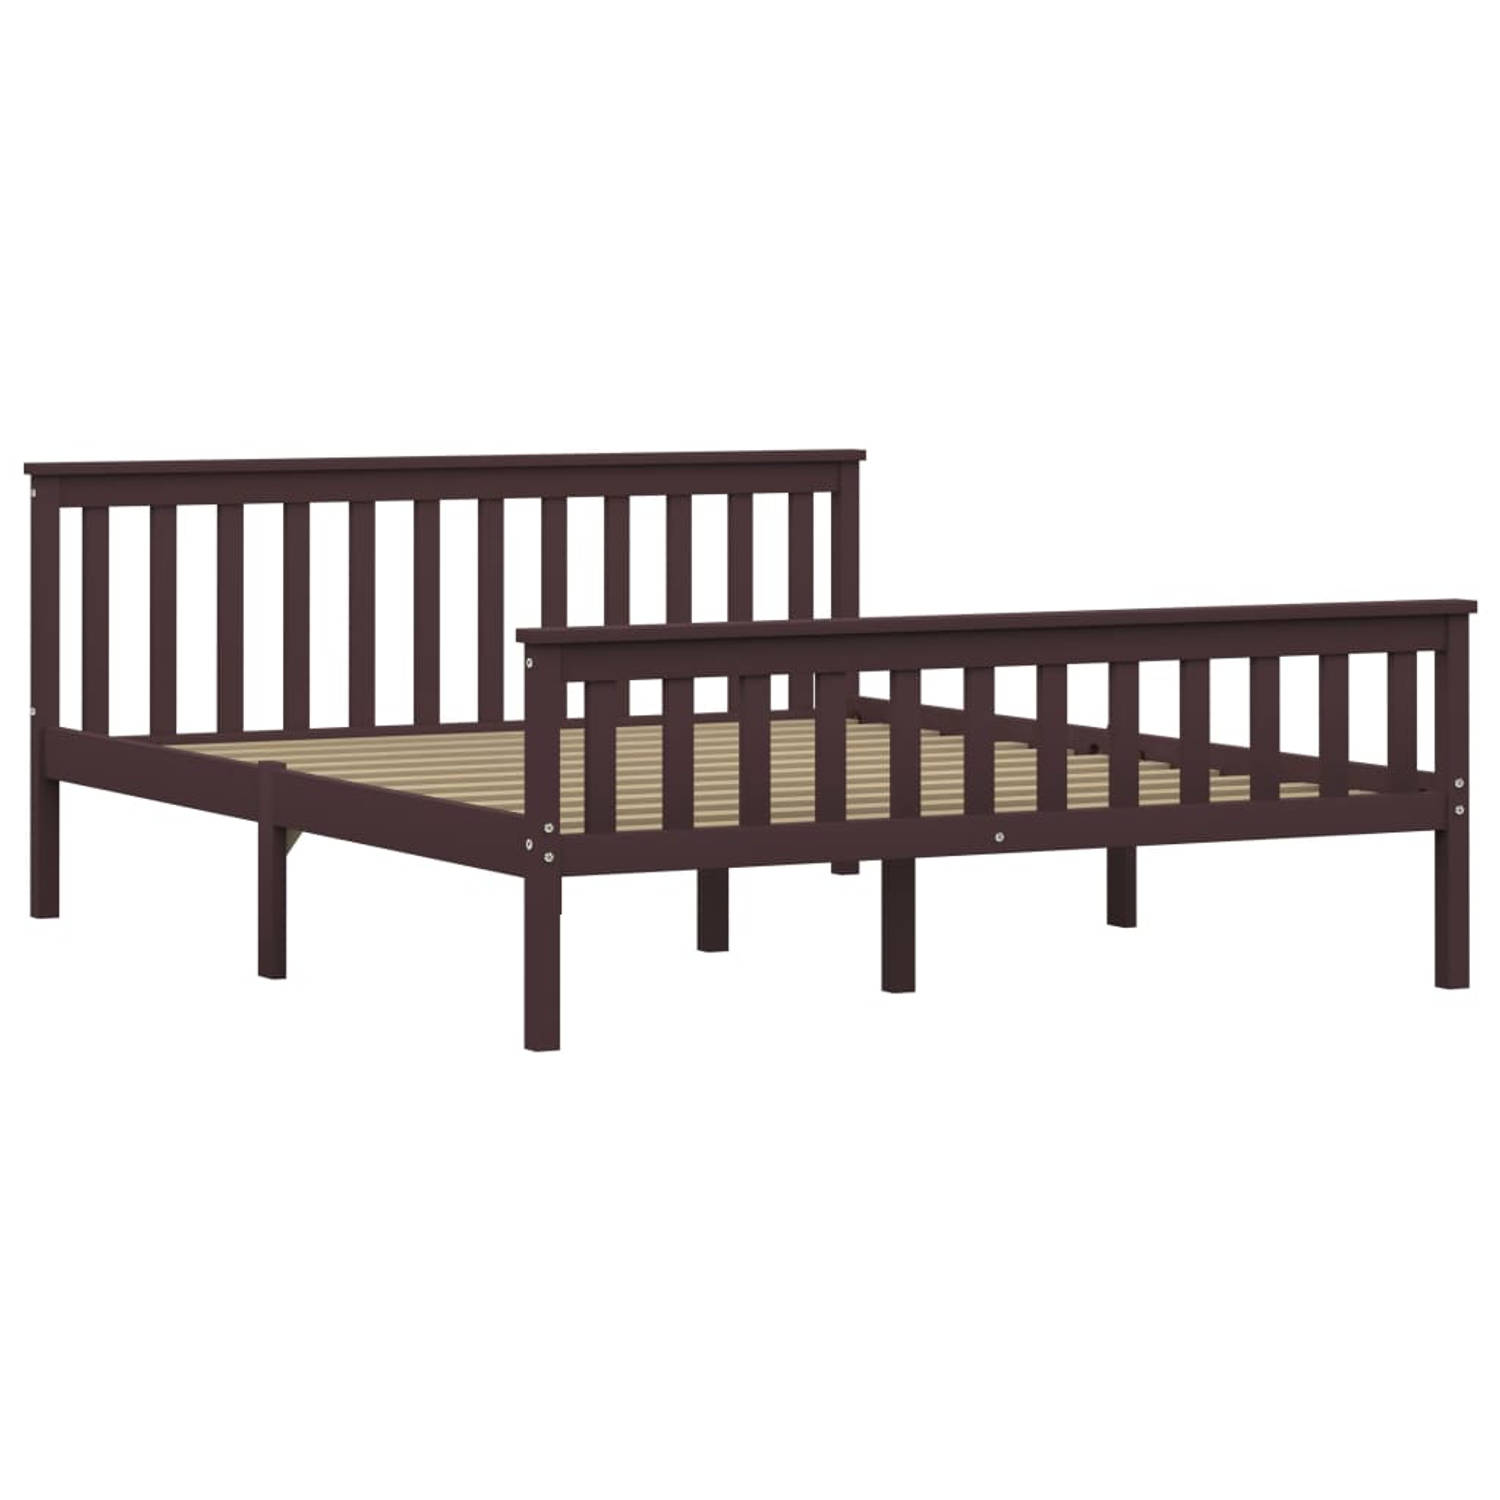 The Living Store Bedframe massief grenenhout donkerbruin 160x200 cm - Bed